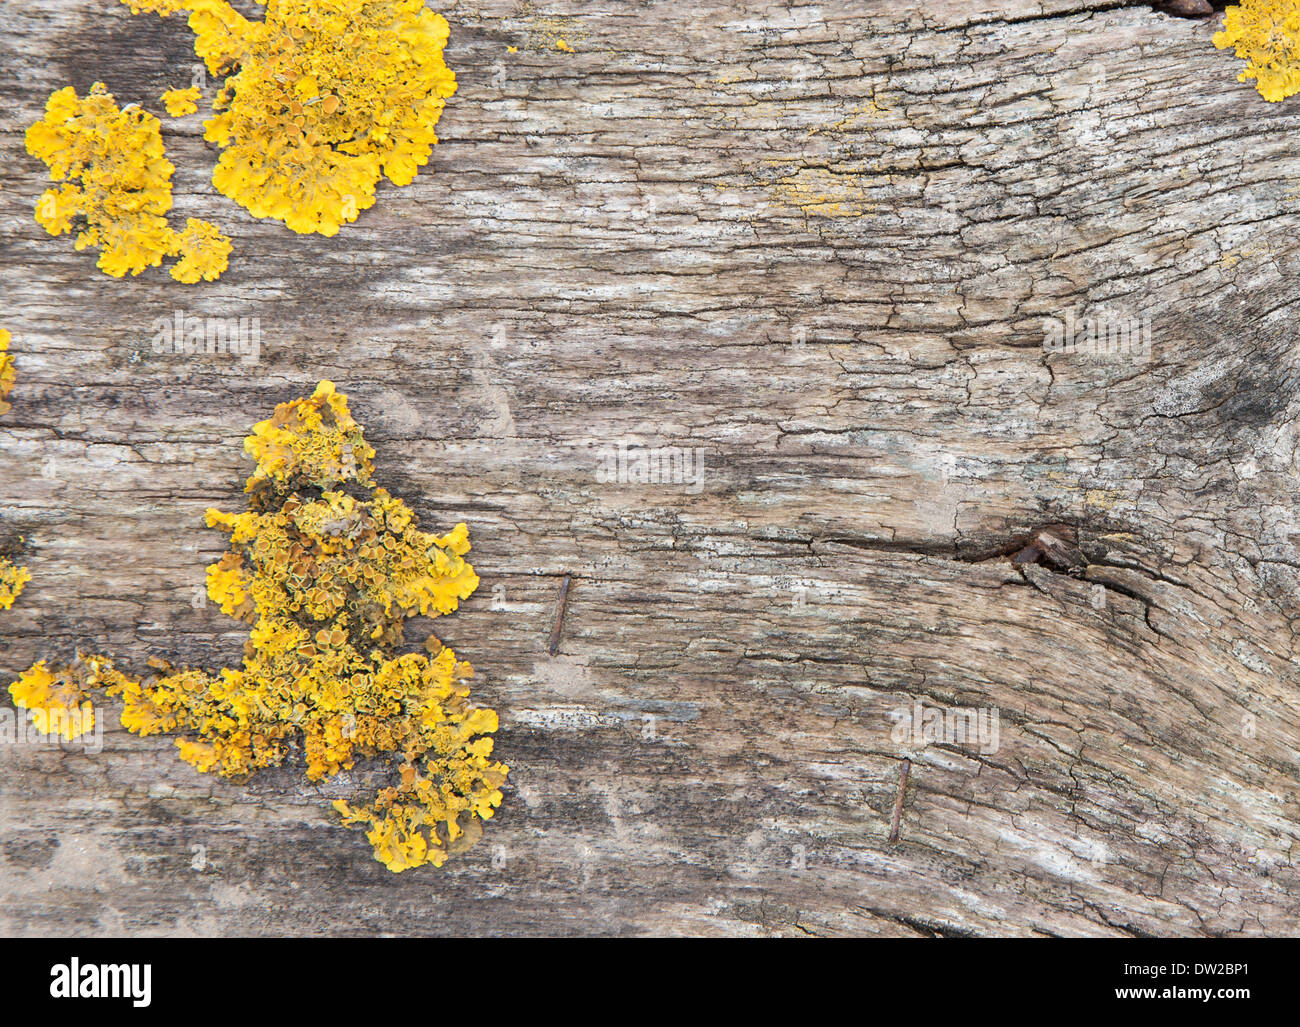 Weathered Wood et moss background Banque D'Images